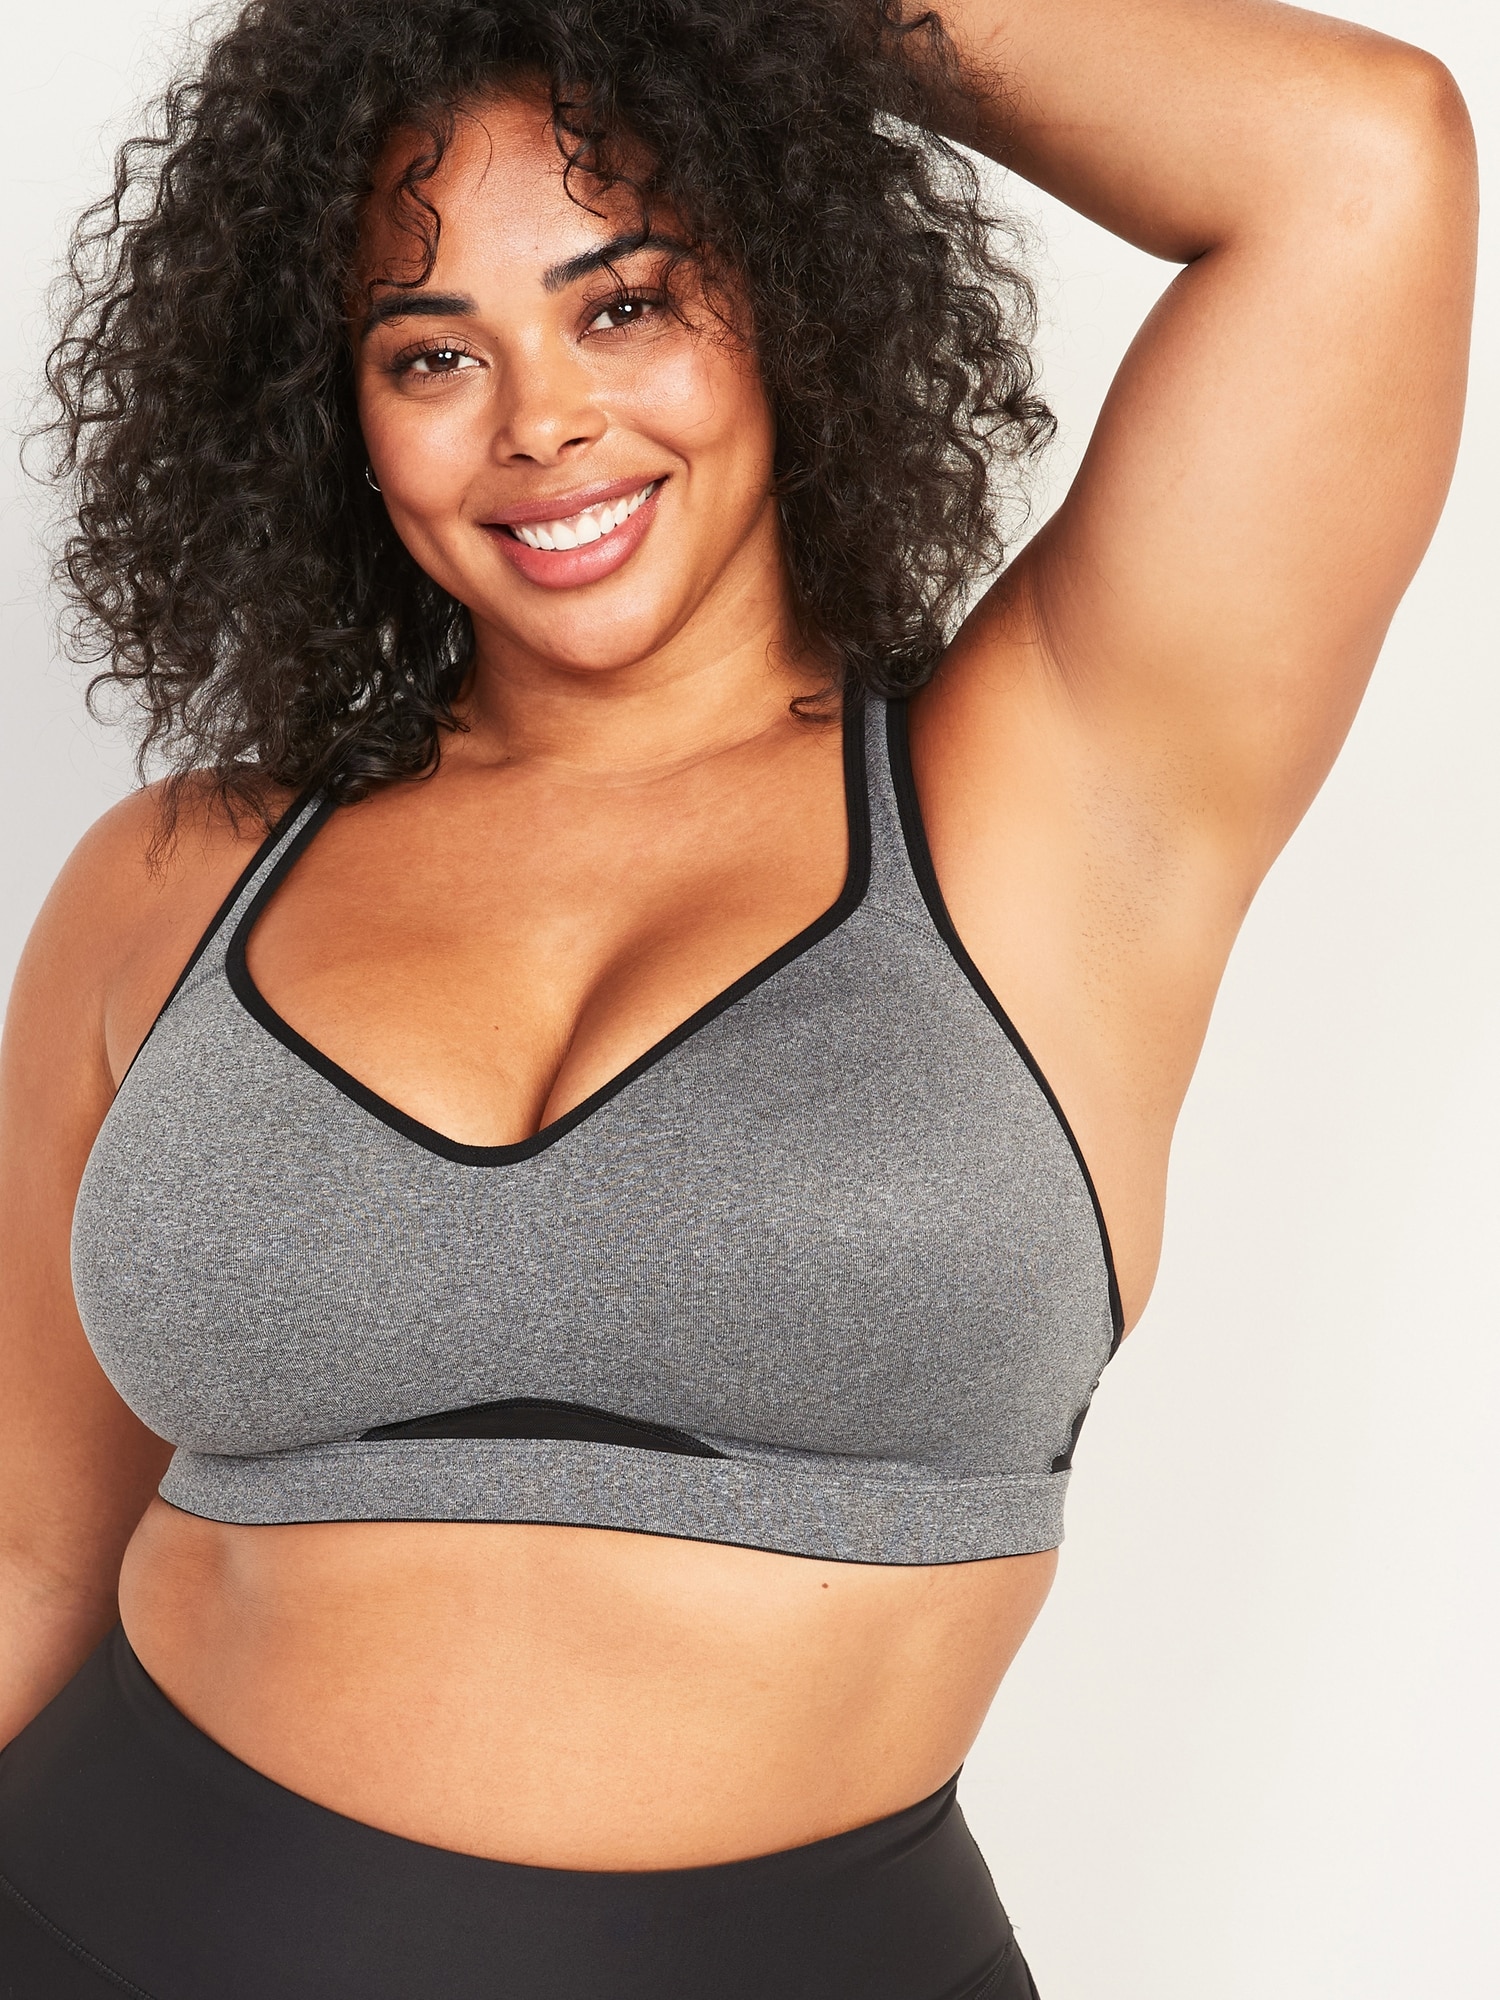 Shop Hush Women's Sports Bras up to 60% Off